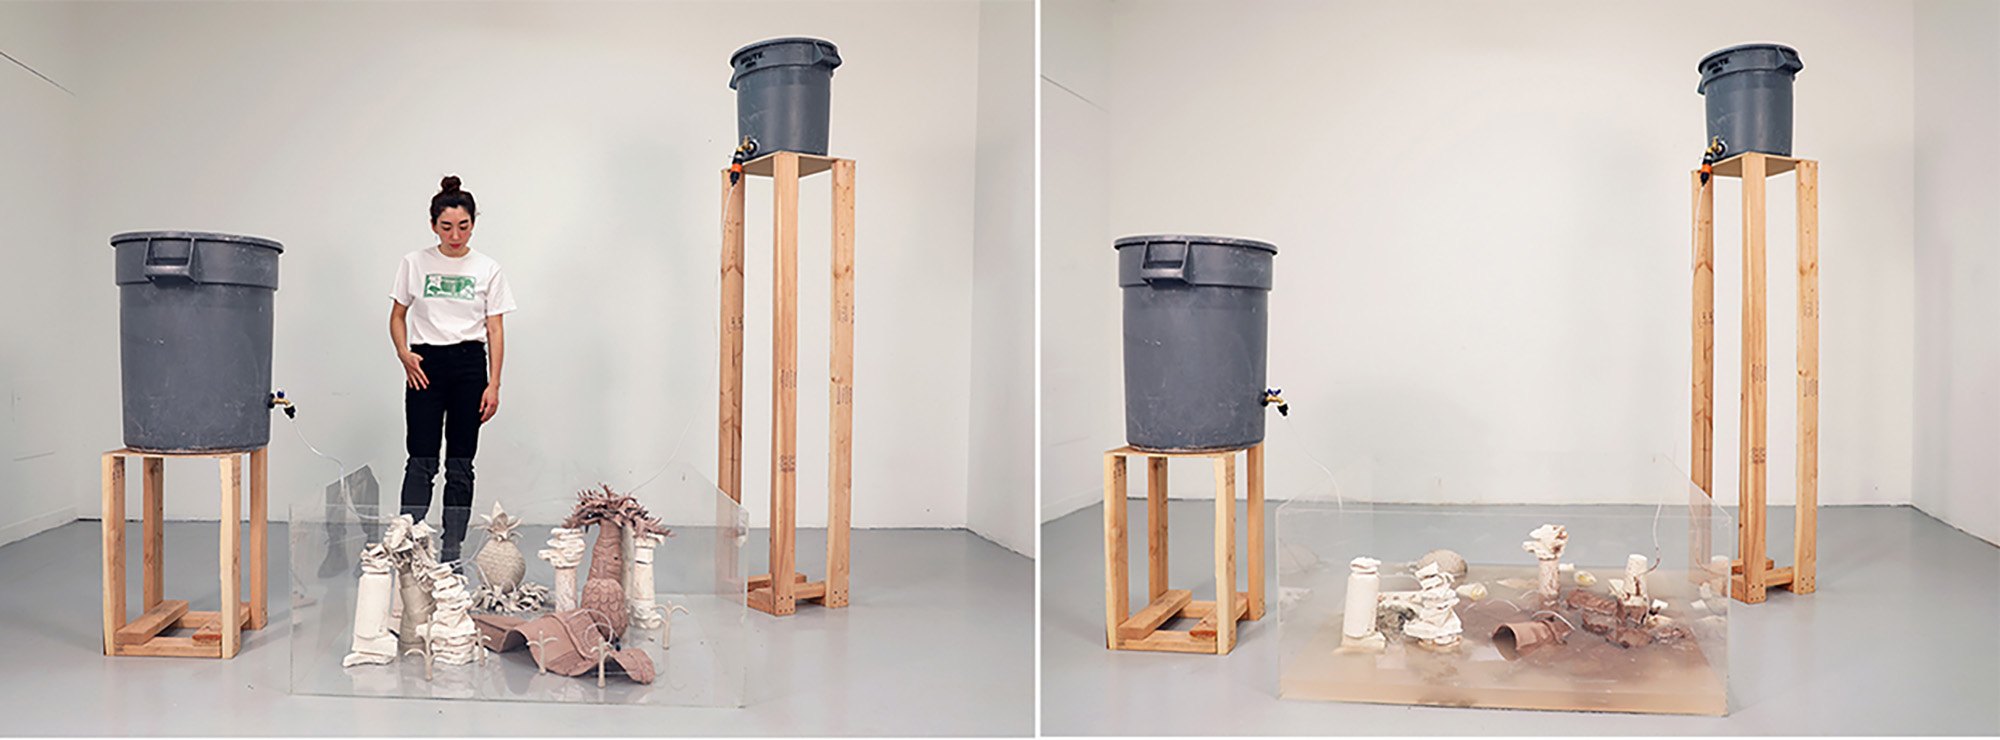 'Frágil sumario de la historia natural de las indias (A Fragile Natural History of the Indies)', May 2019, wood, DIY rain barrels, irrigation sprinkle system, plaster, unfired clay and porcelain, water, plexiglass container, variable dimensions.
